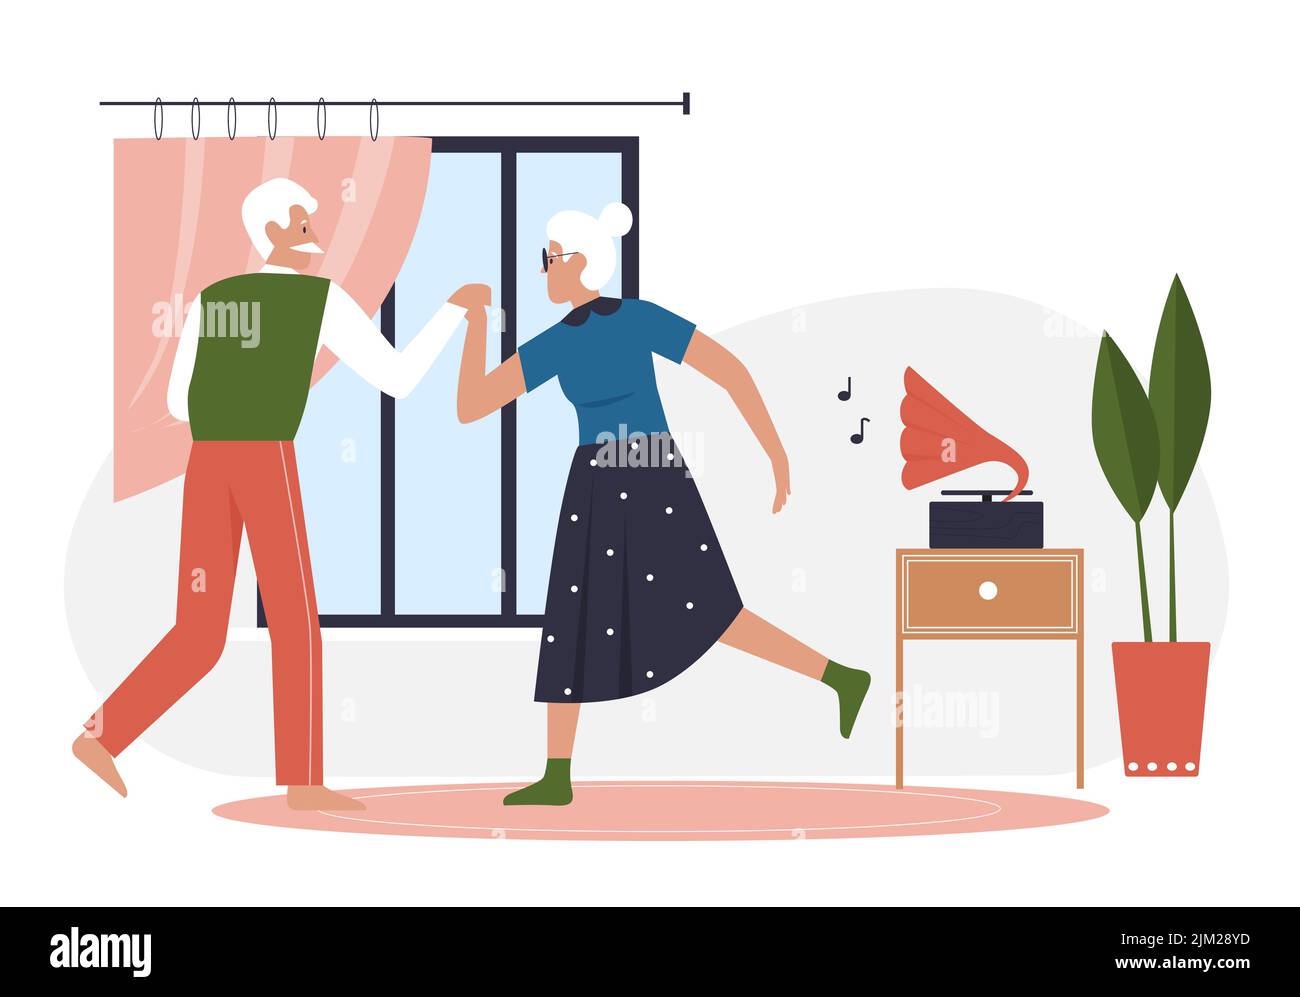 Elderly couple dancing. Seniors people spending funny time together vector illustration Stock Vector